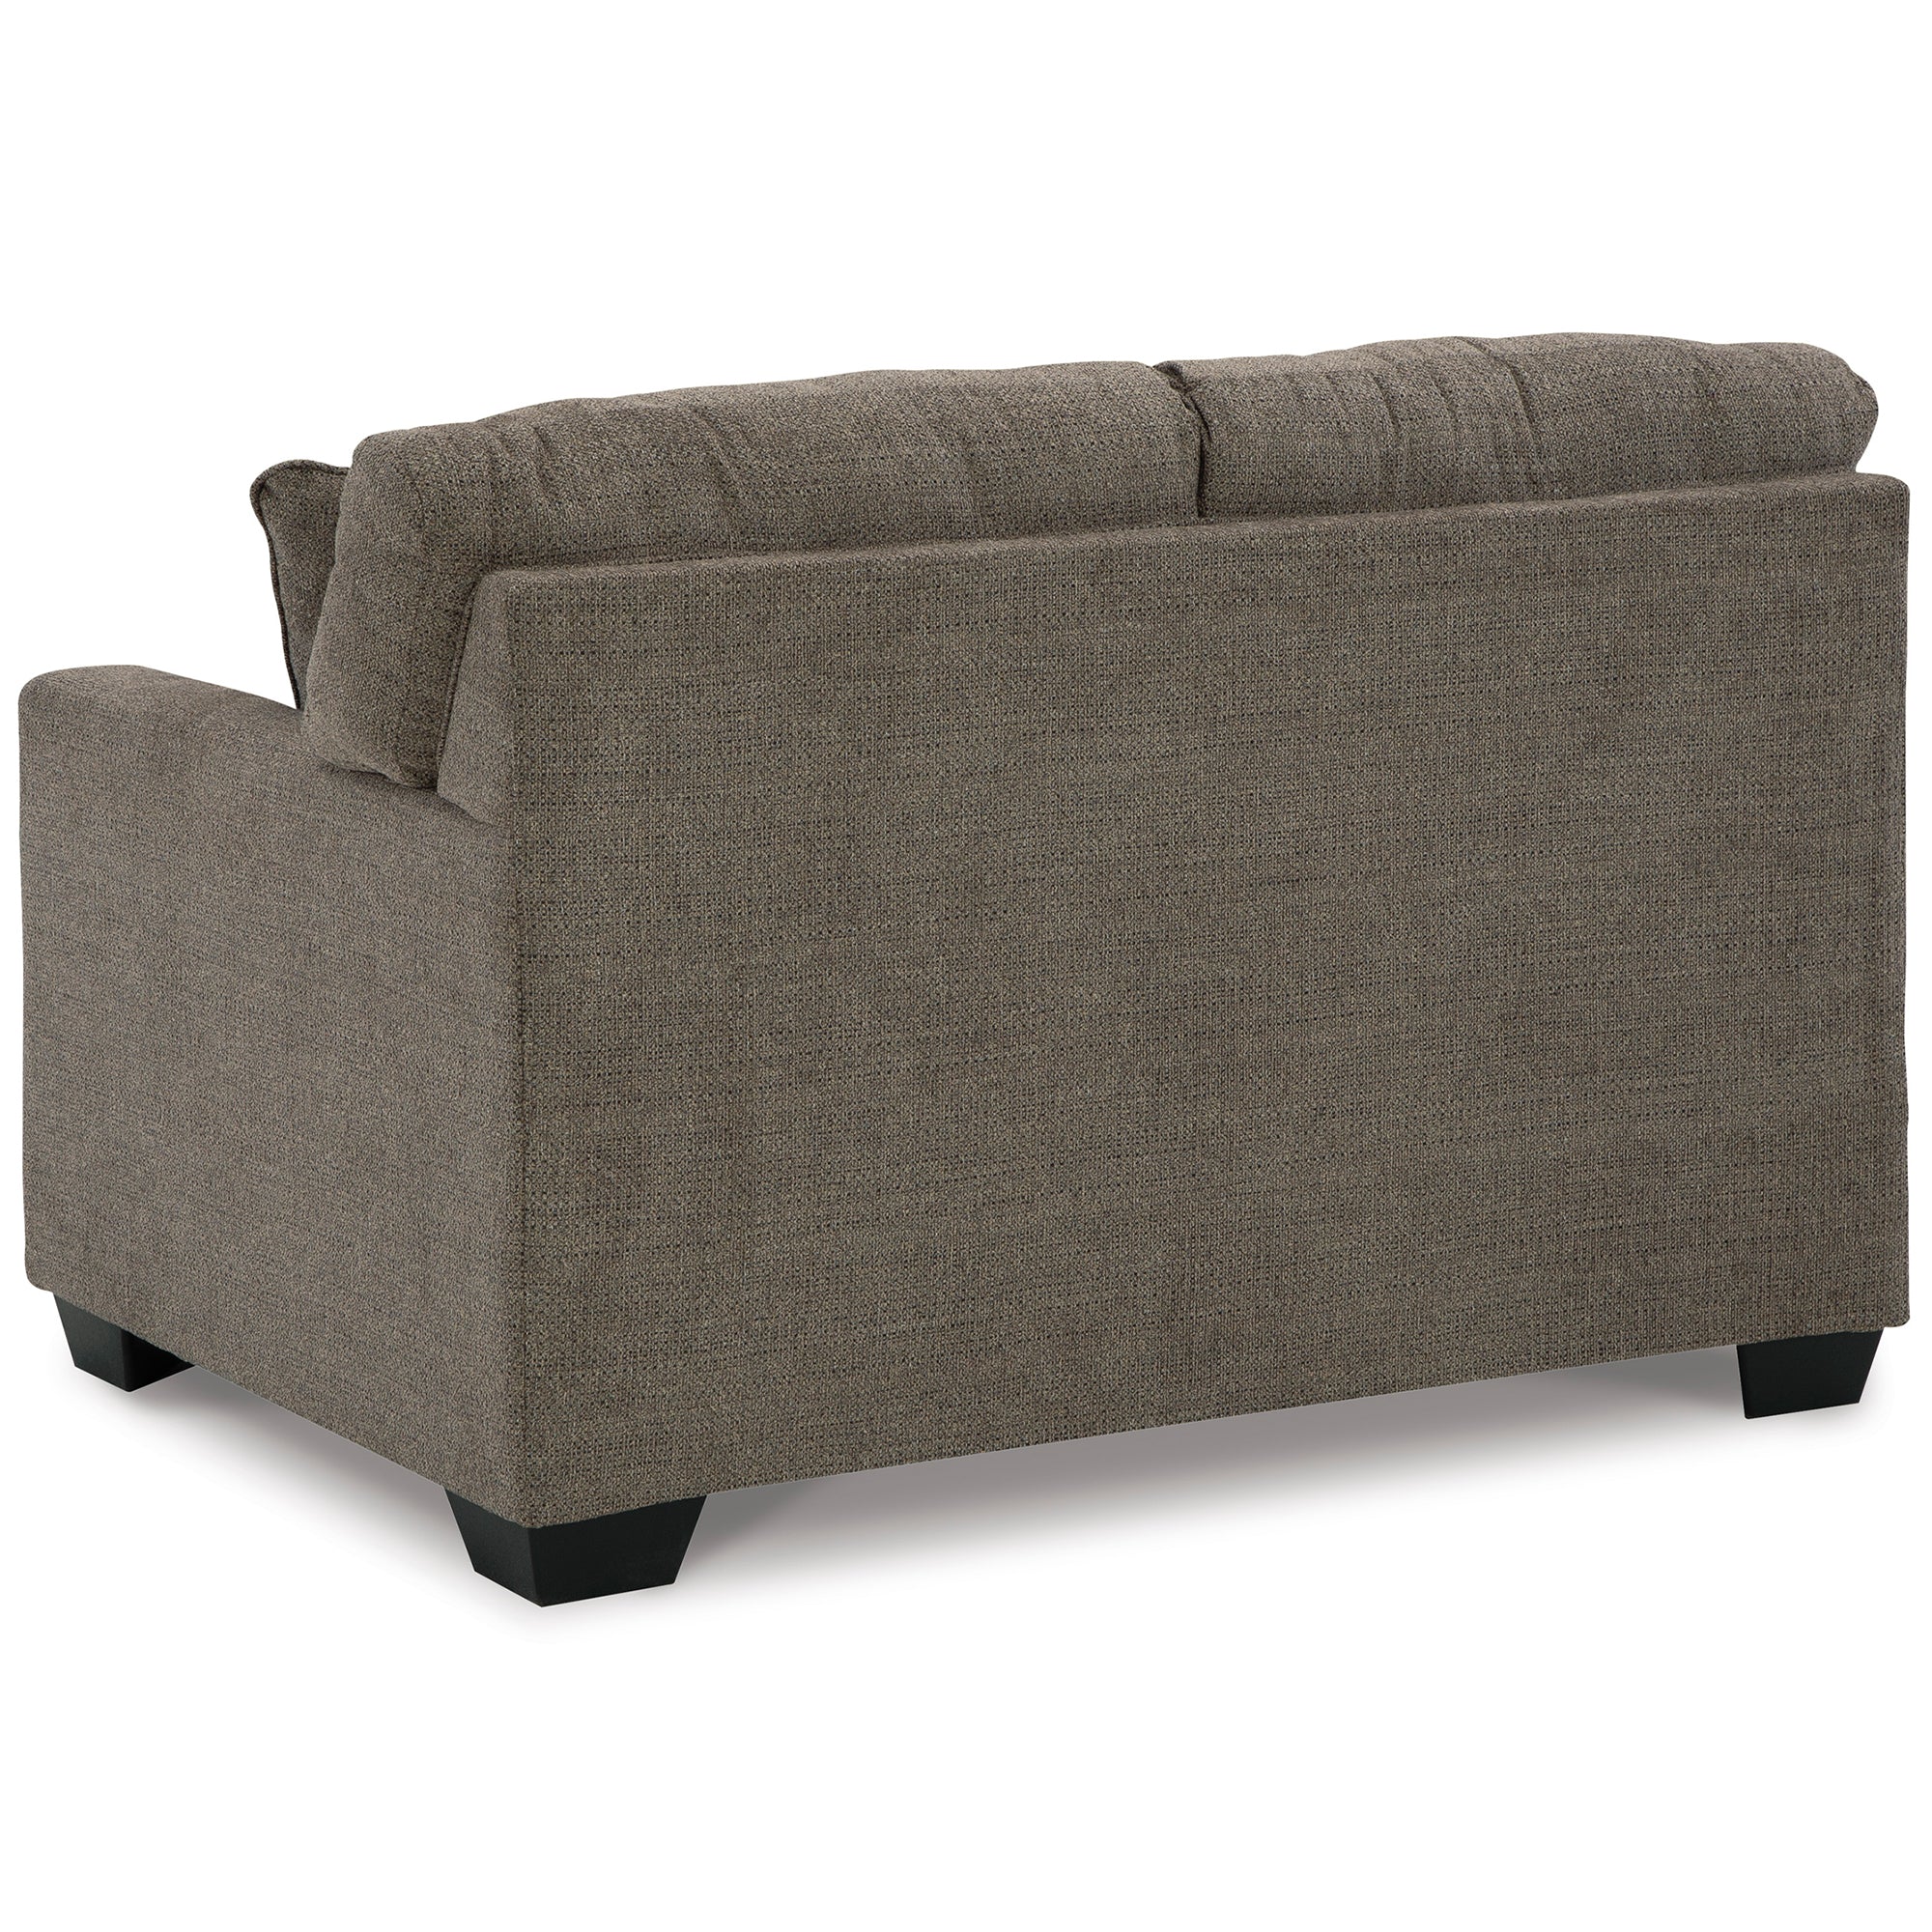 Chic Mahoney Loveseat in deep chocolate, combines comfort with contemporary elegance